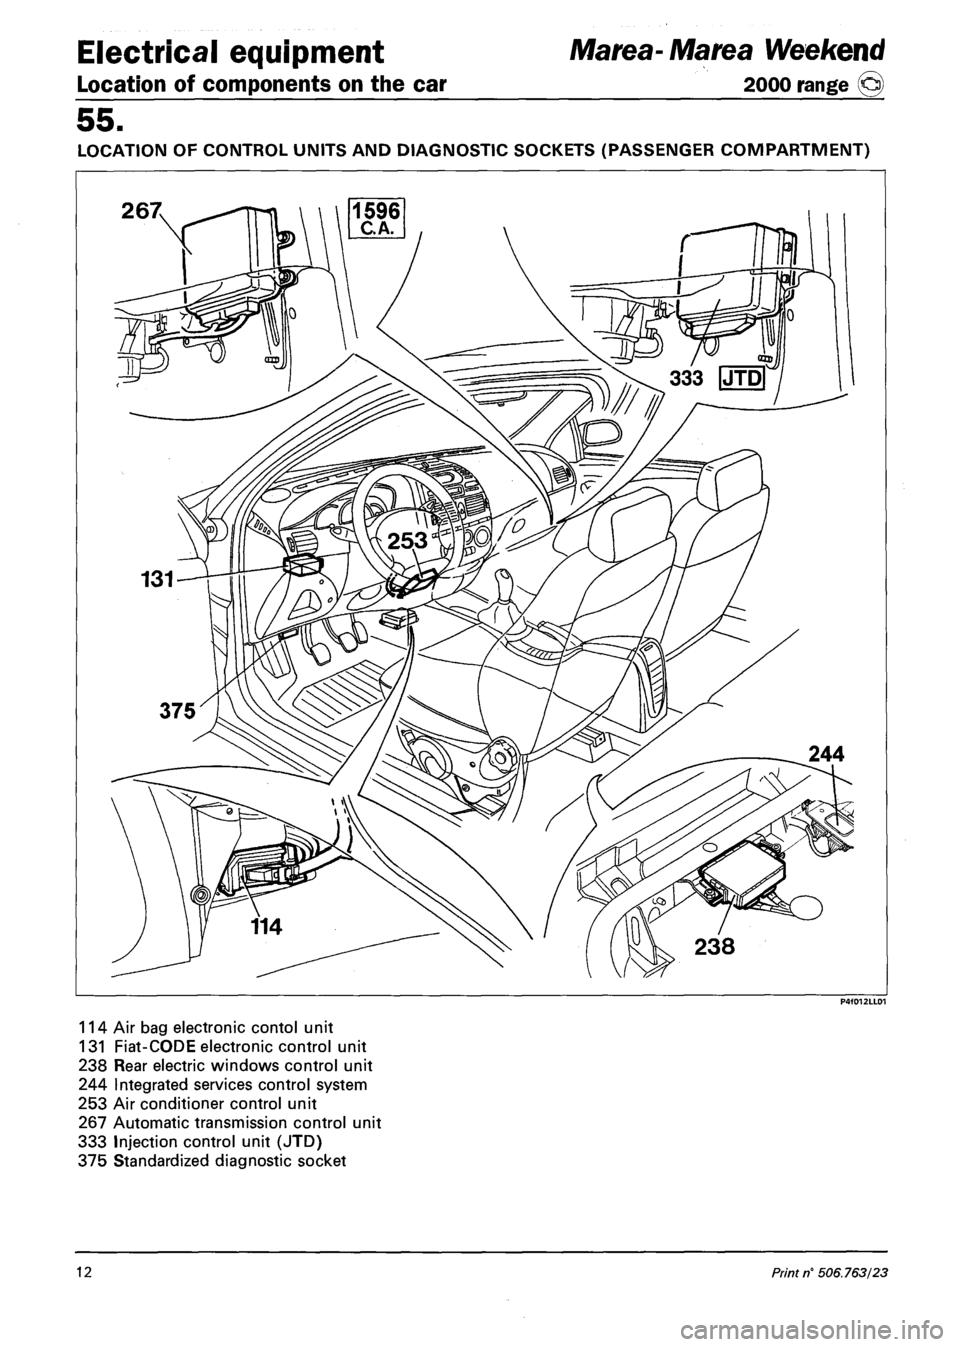 FIAT MAREA 2001 1.G Workshop Manual Electrical equipment Marea-Marea Weekend 
Location of components on the car 2000 range © 
55. 
LOCATION OF CONTROL UNITS AND DIAGNOSTIC SOCKETS (PASSENGER COMPARTMENT) 
P4f012LL01 
114 Air bag electr